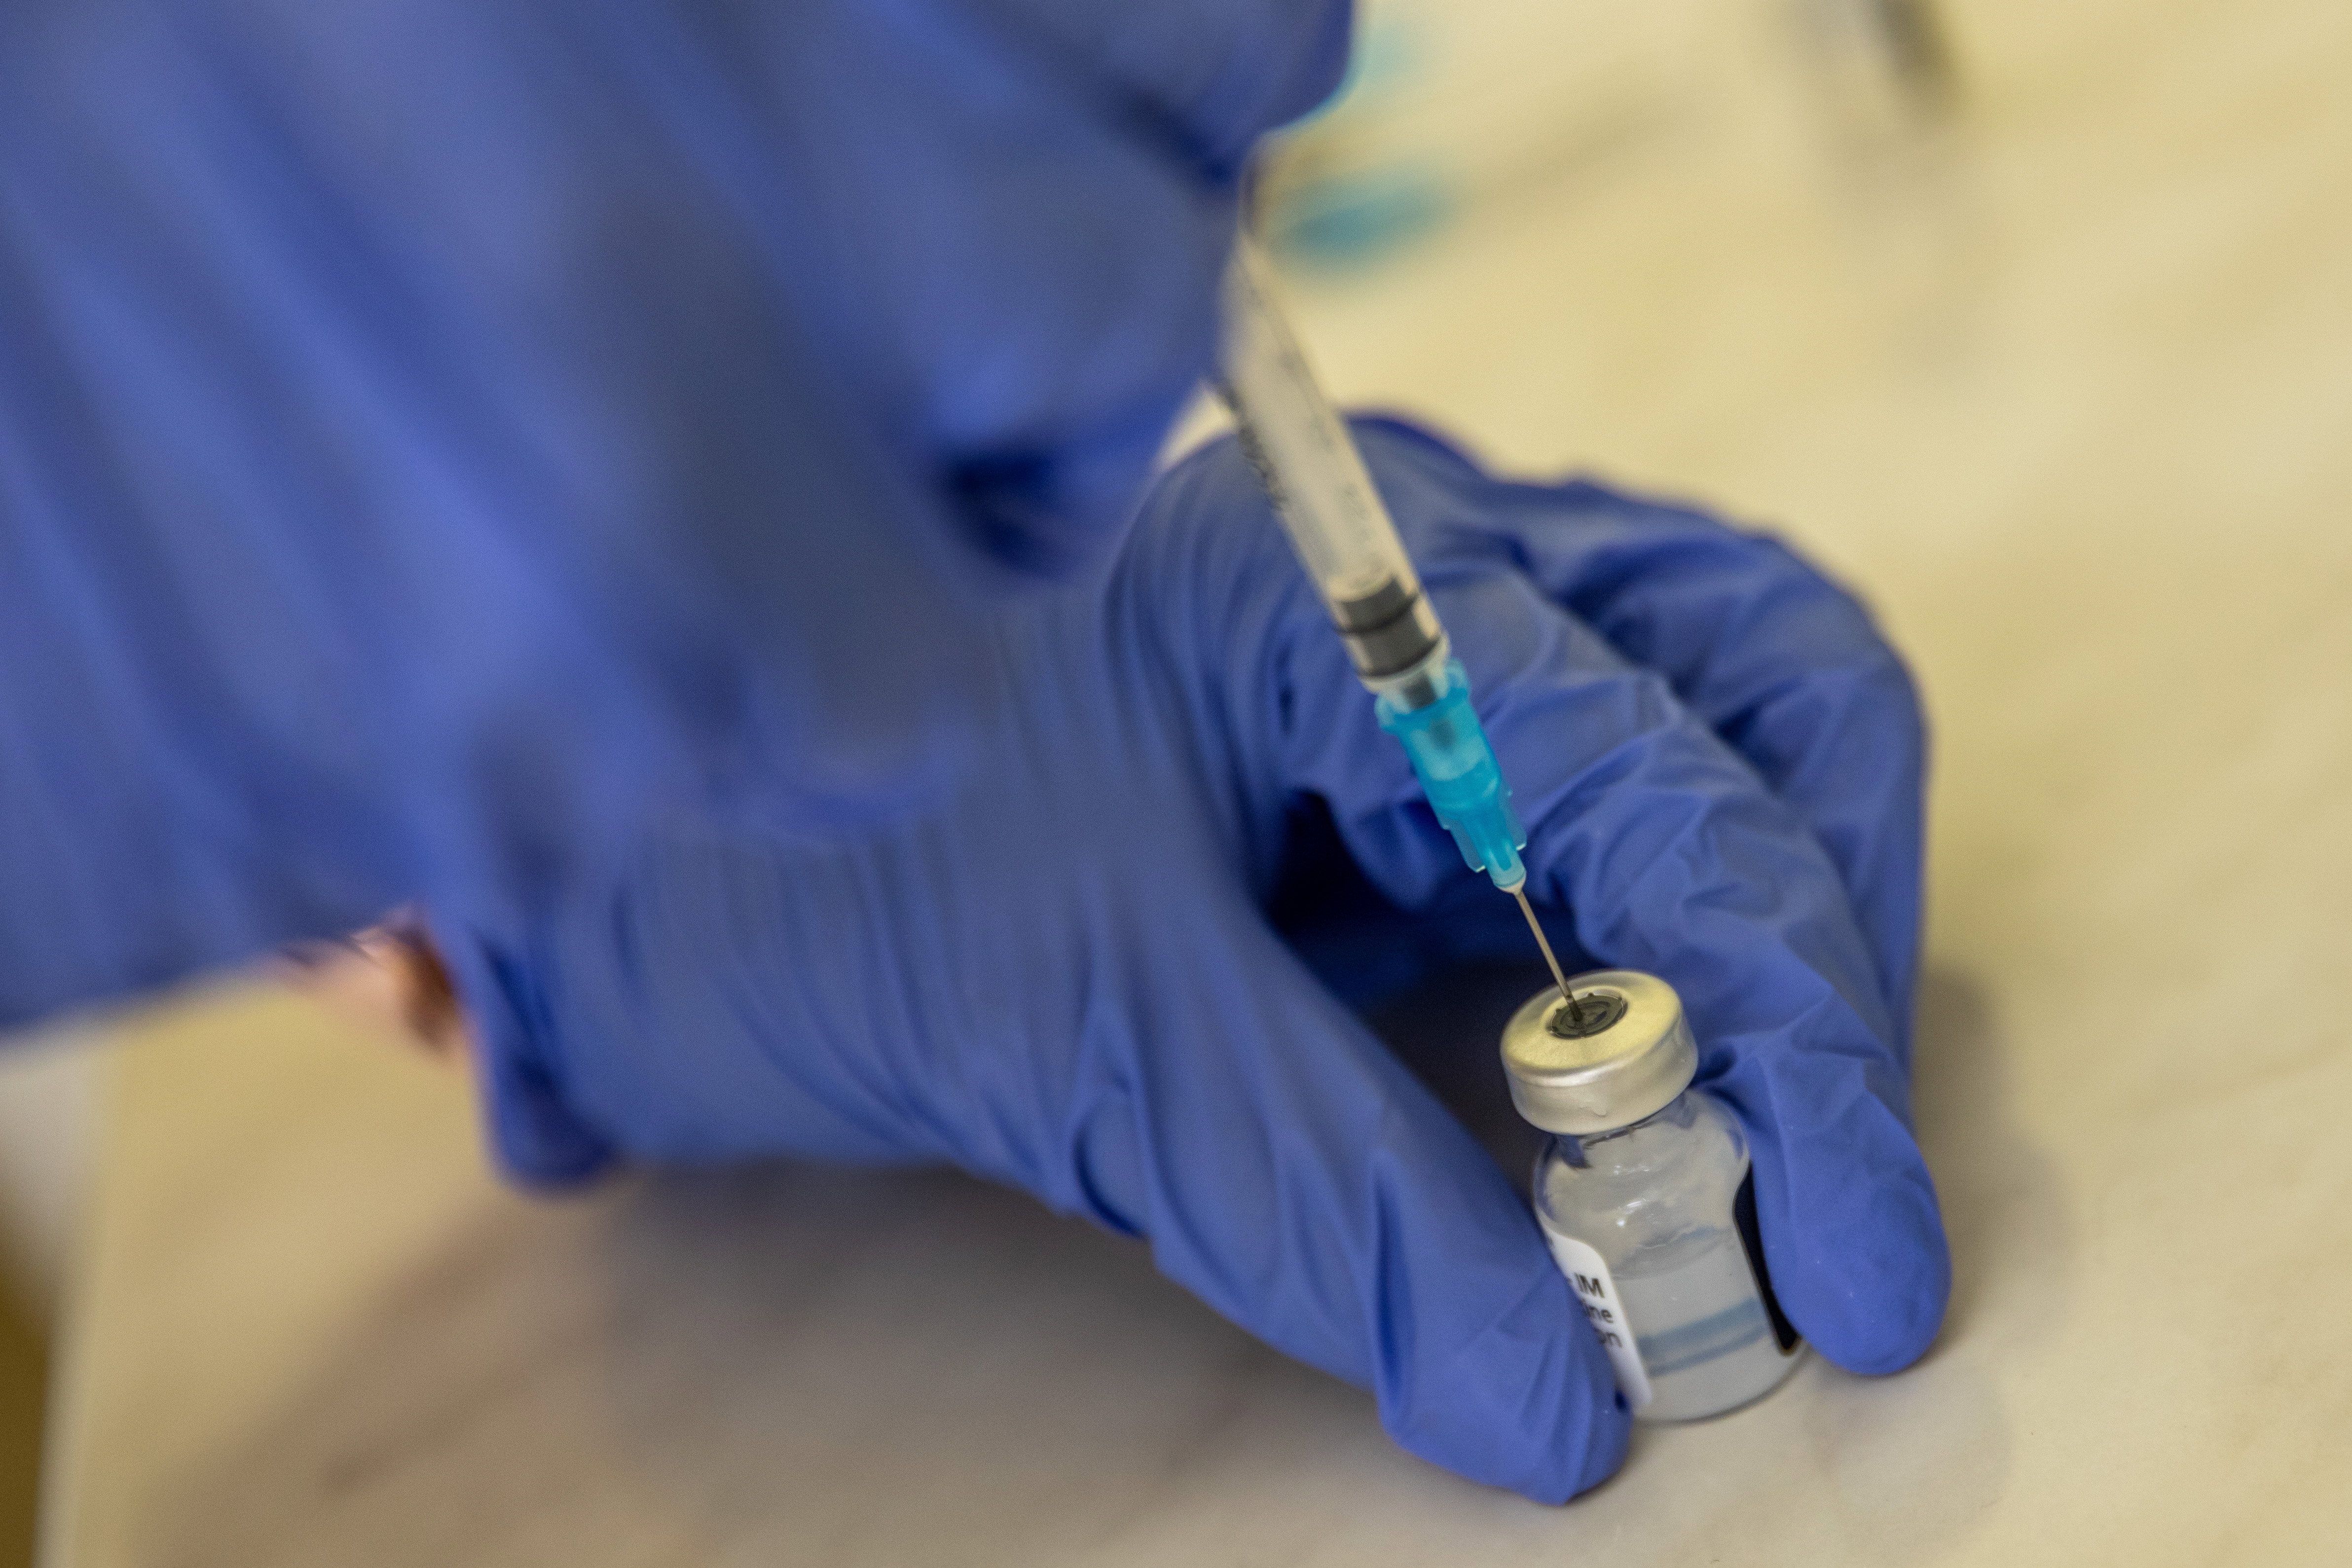 France and Belgium grapple with vaccine shortages